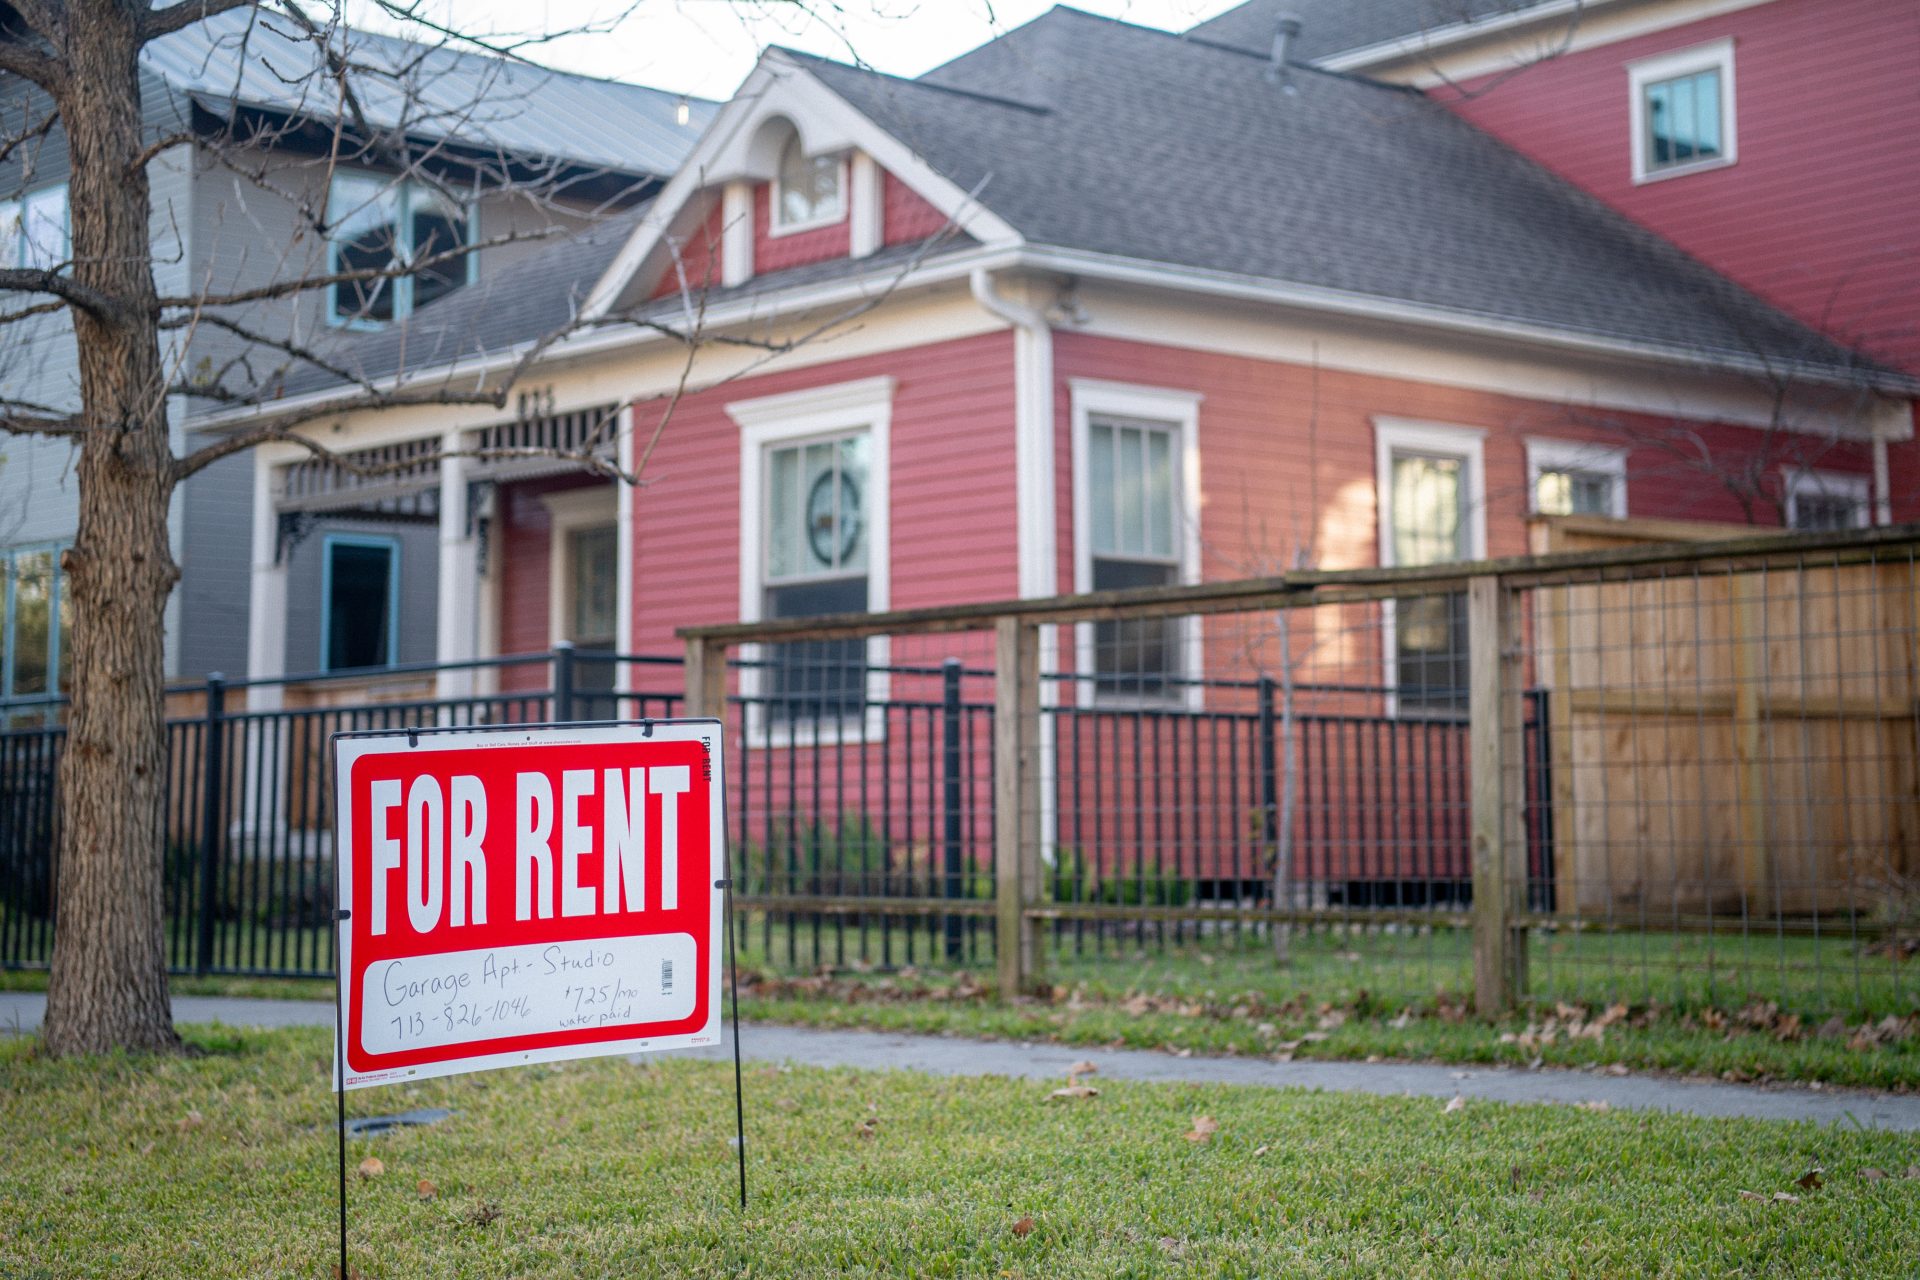 U.S. Median Rent To Reach Record High Of $2,000 By Summer